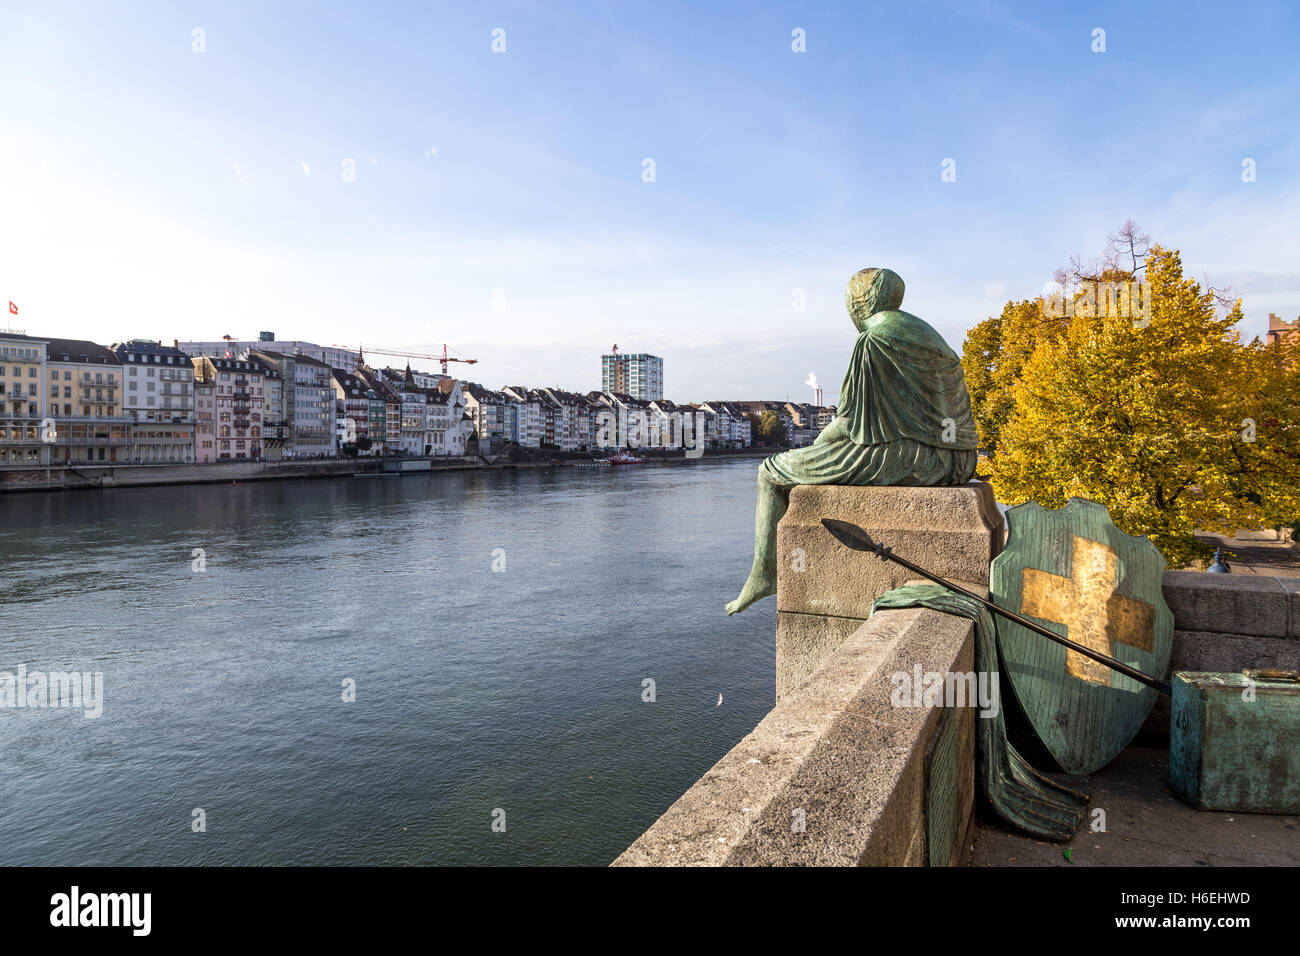 Basel, Switzerland - October 24, 2016: The Helvetia statue at the Rhine river Stock Photo